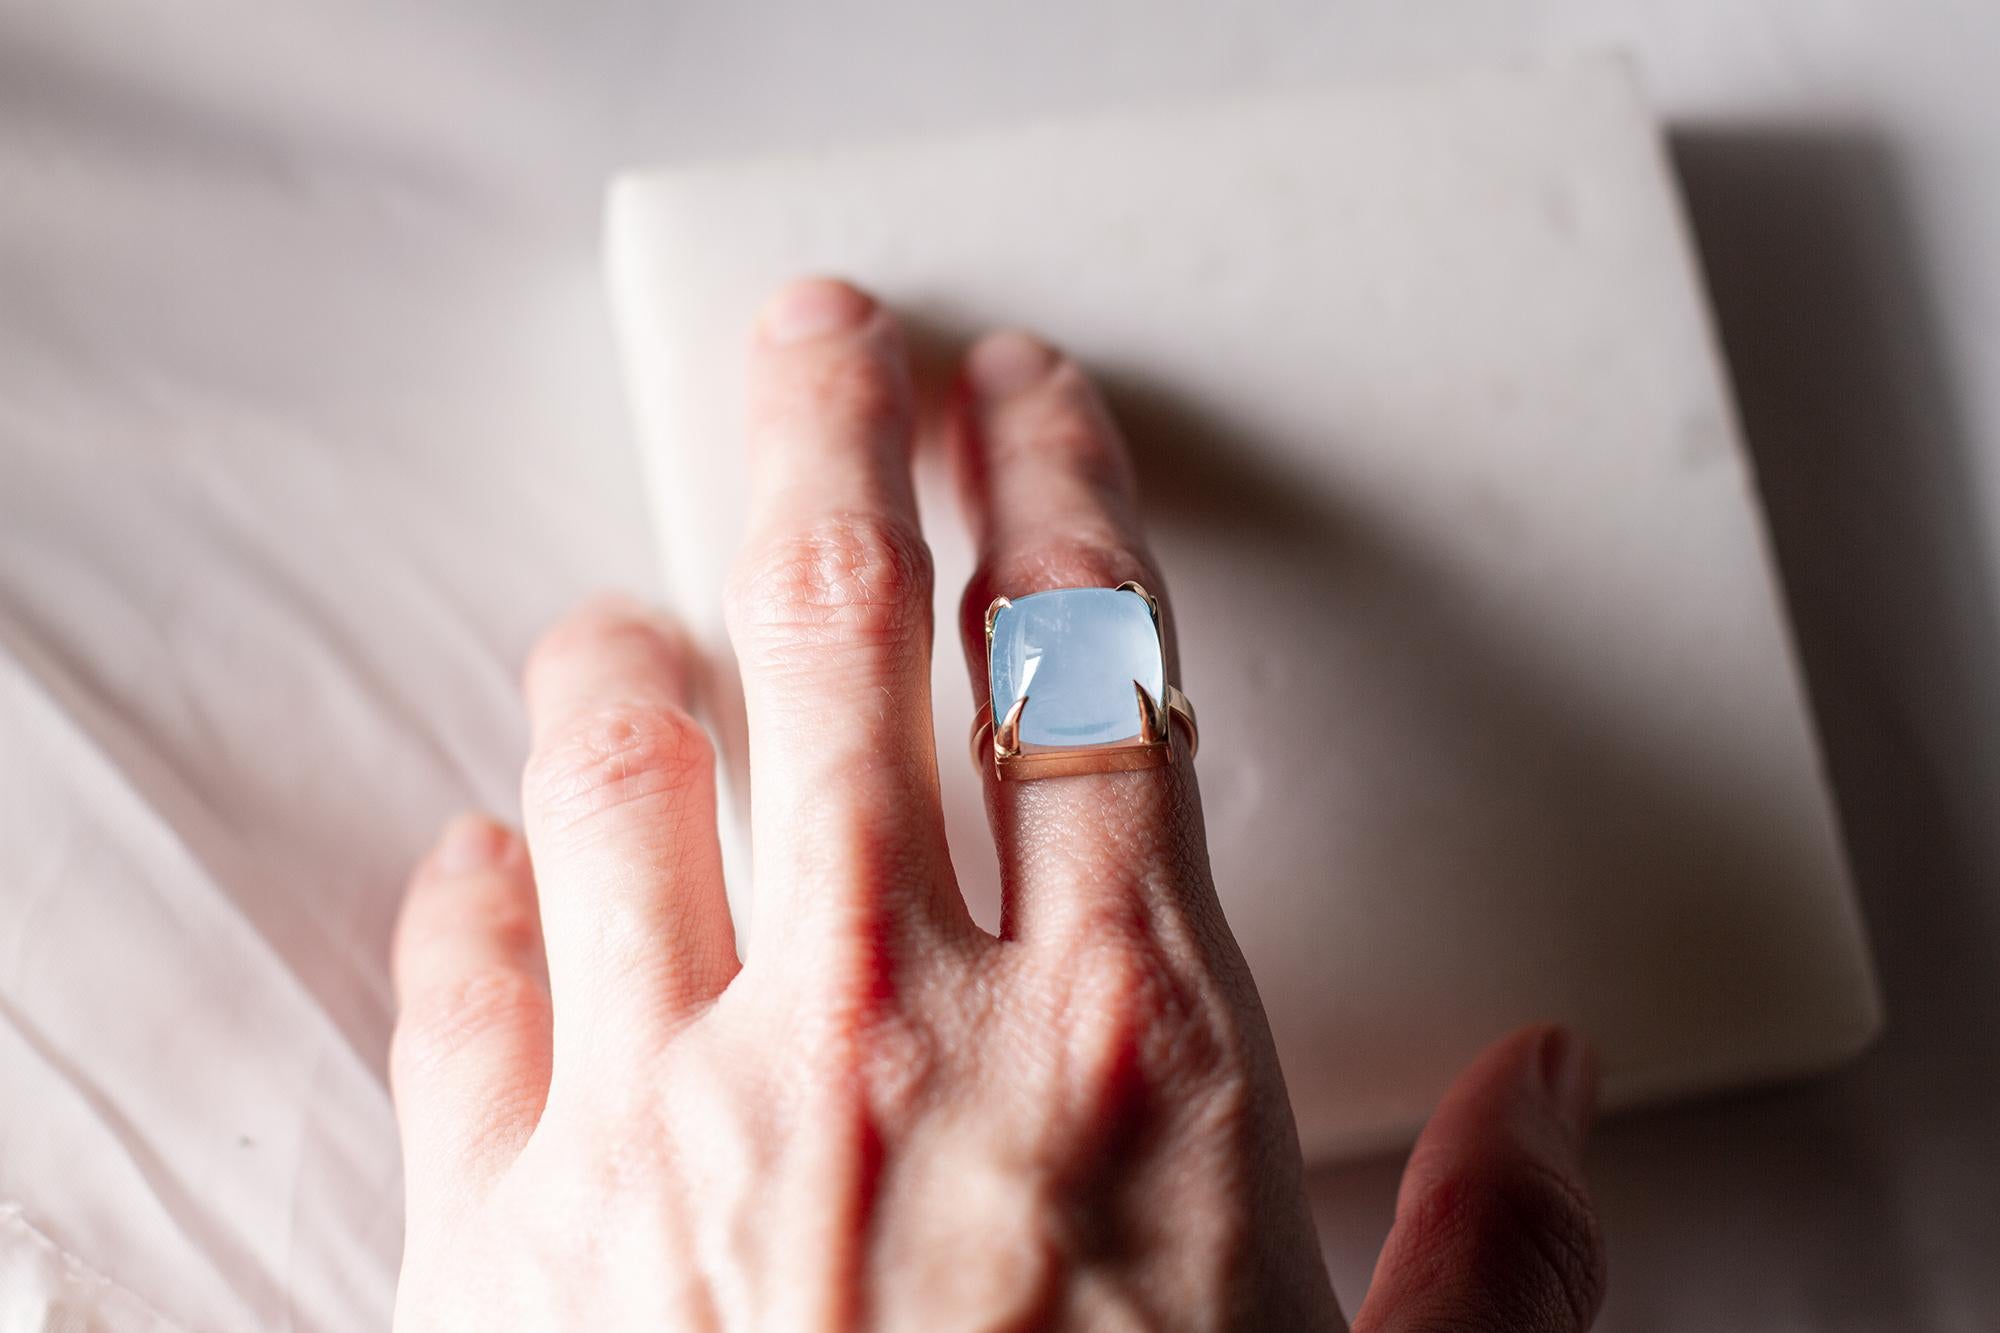 This ring is made of 18 karat yellow gold and sugarloaf cut aquamarine.

When for most of the gem it works the way: the smaller prongs the better. This is the shape and size of the gem that we really enjoy to see avoiding the typical for sugarloaf